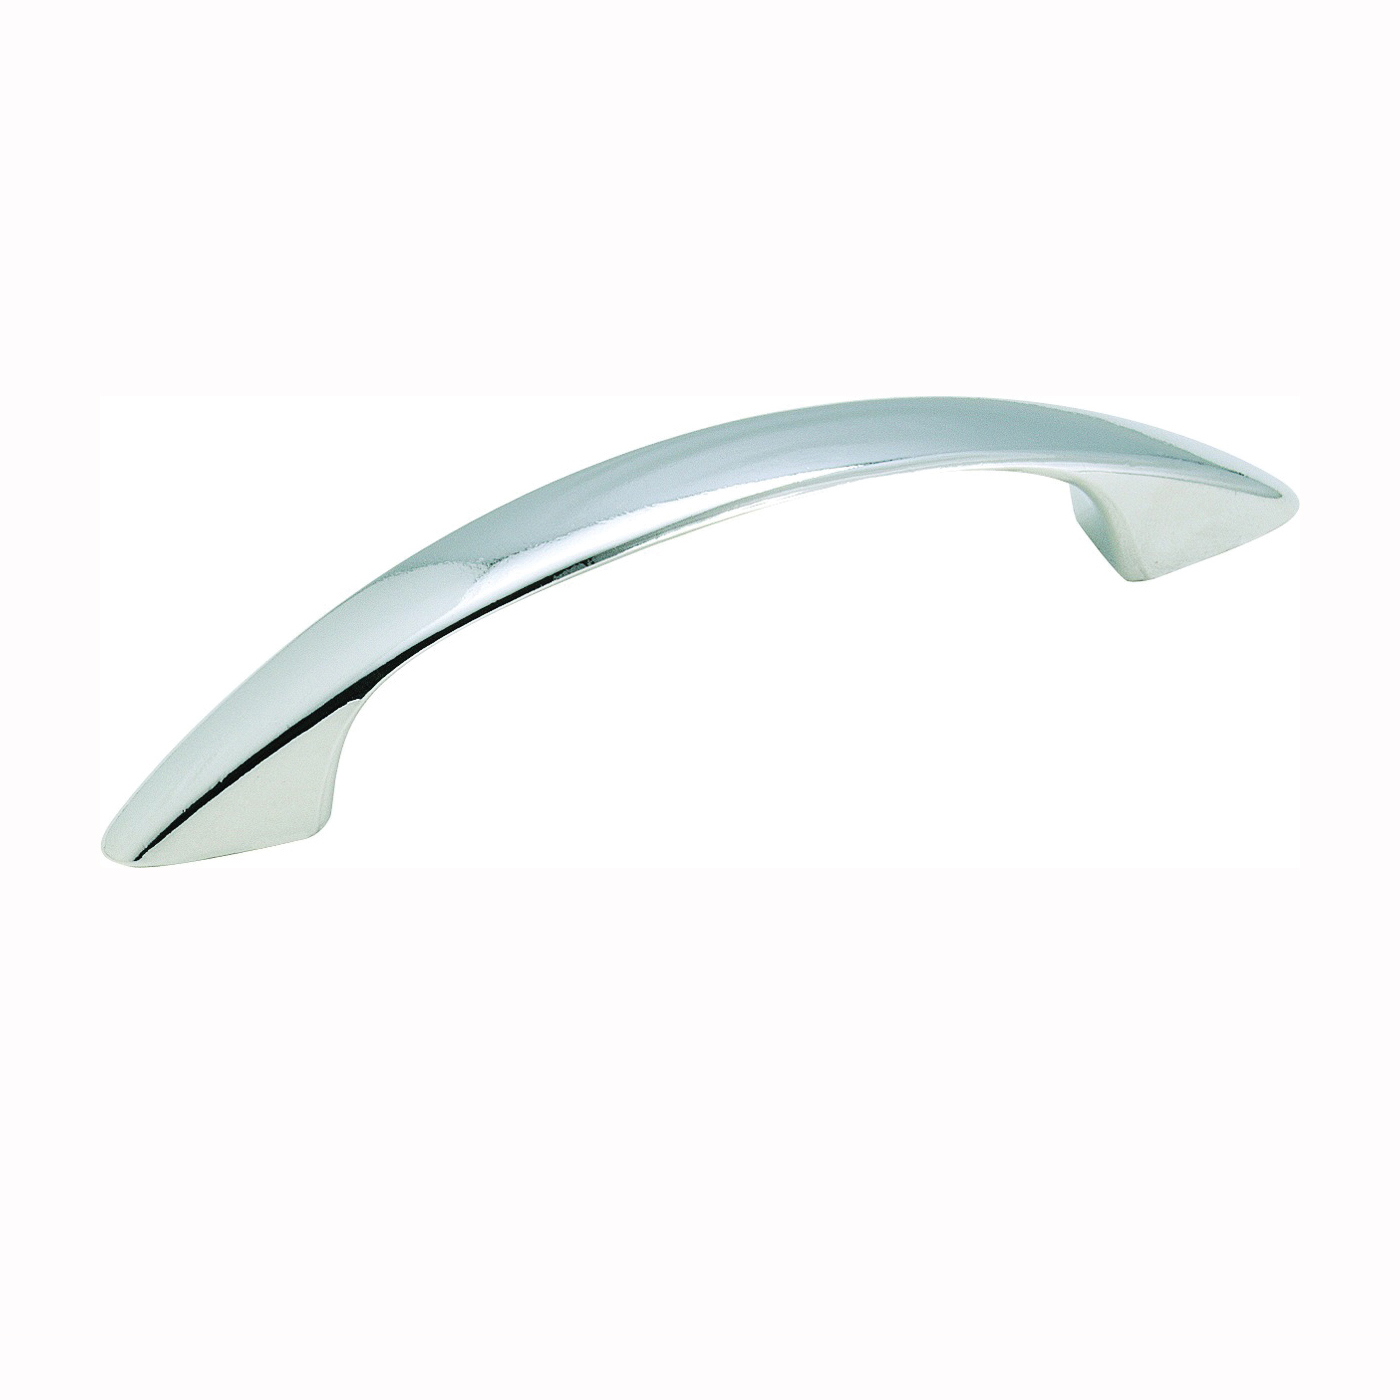 BP341626 Cabinet Pull, 4-1/16 in L Handle, 3/4 in H Handle, 3/4 in Projection, Zinc, Polished Chrome